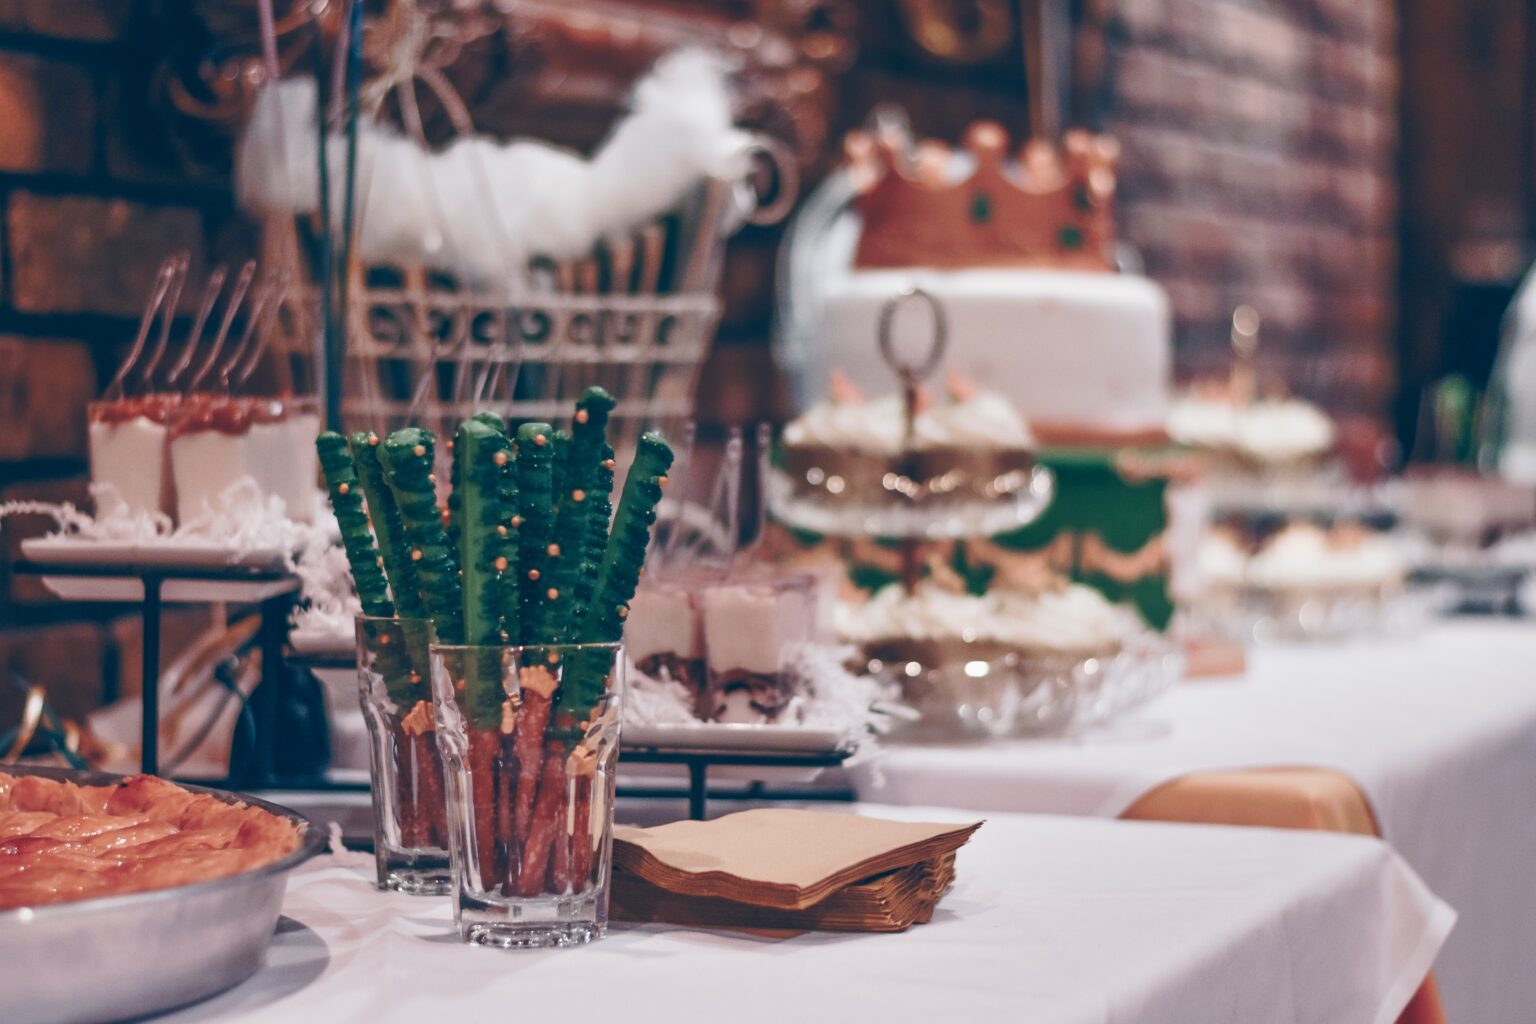 How to Host an Engaging and Fun Virtual Holiday Party?